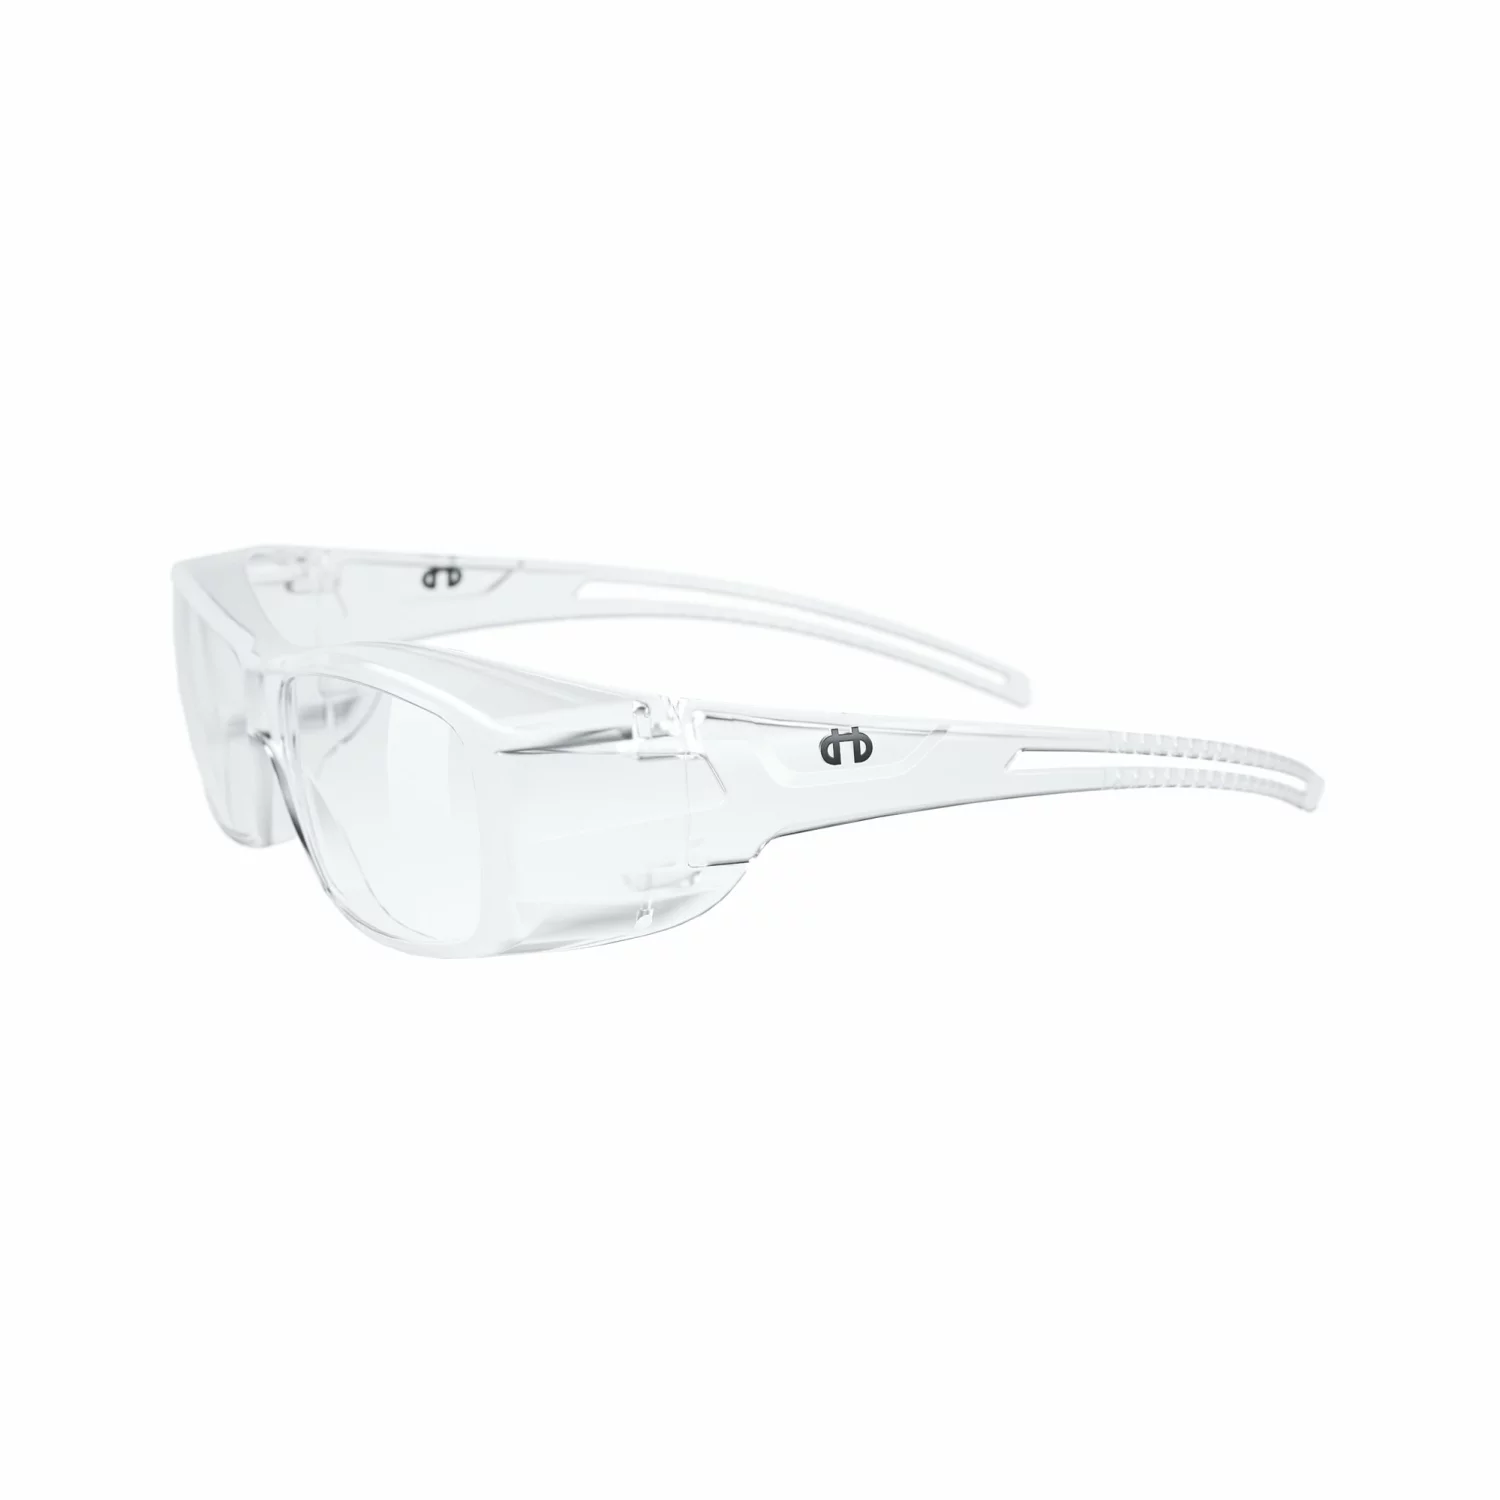 Hellberg Safety 22030-001 Lunettes de protection